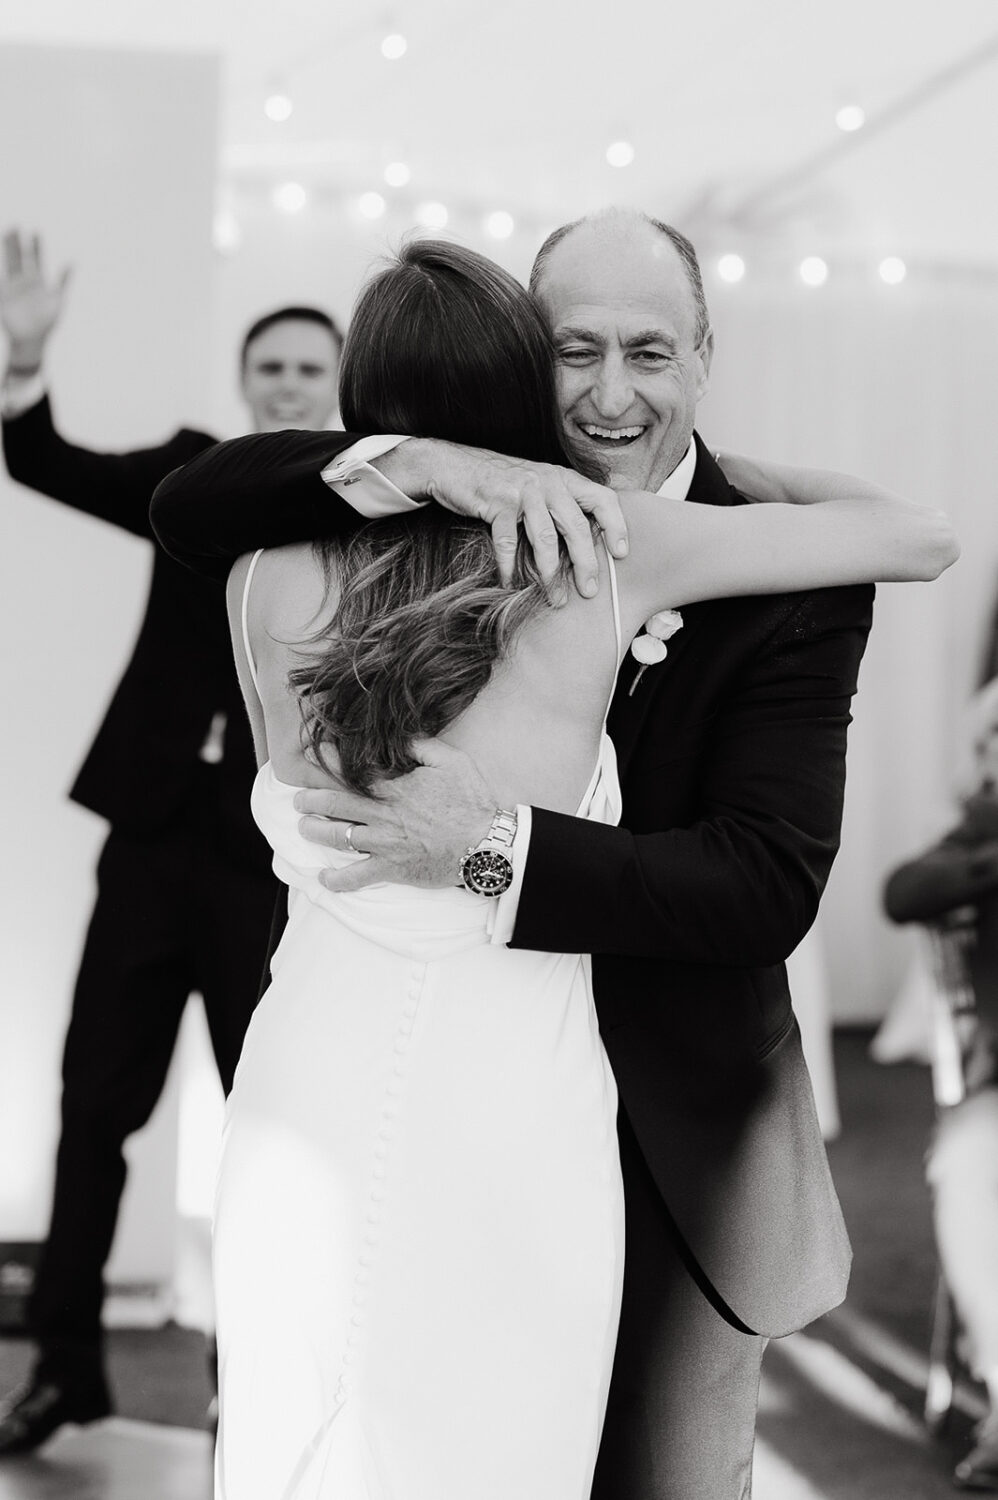 honor dad wedding day black and white father daughter dance dad smiling